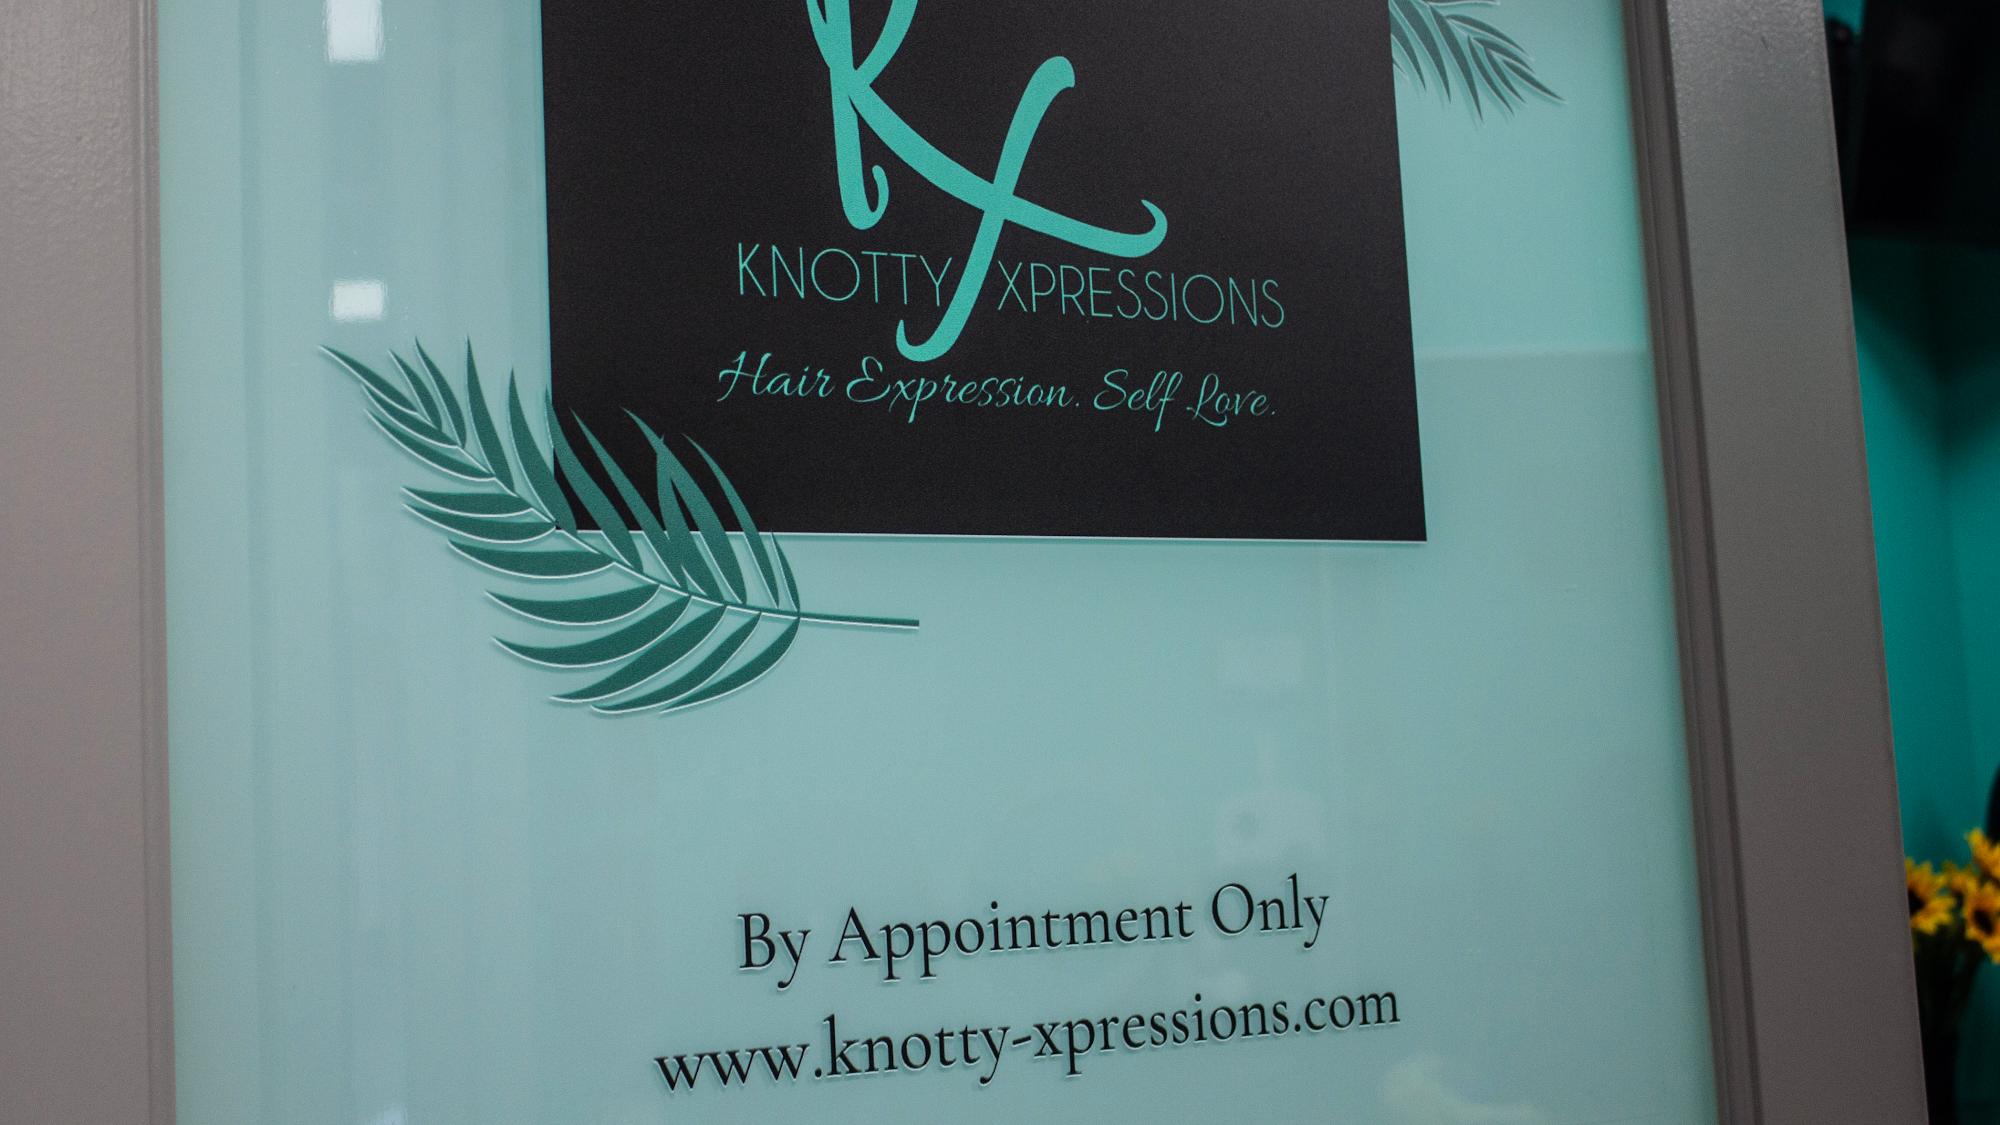 Knotty Xpressions